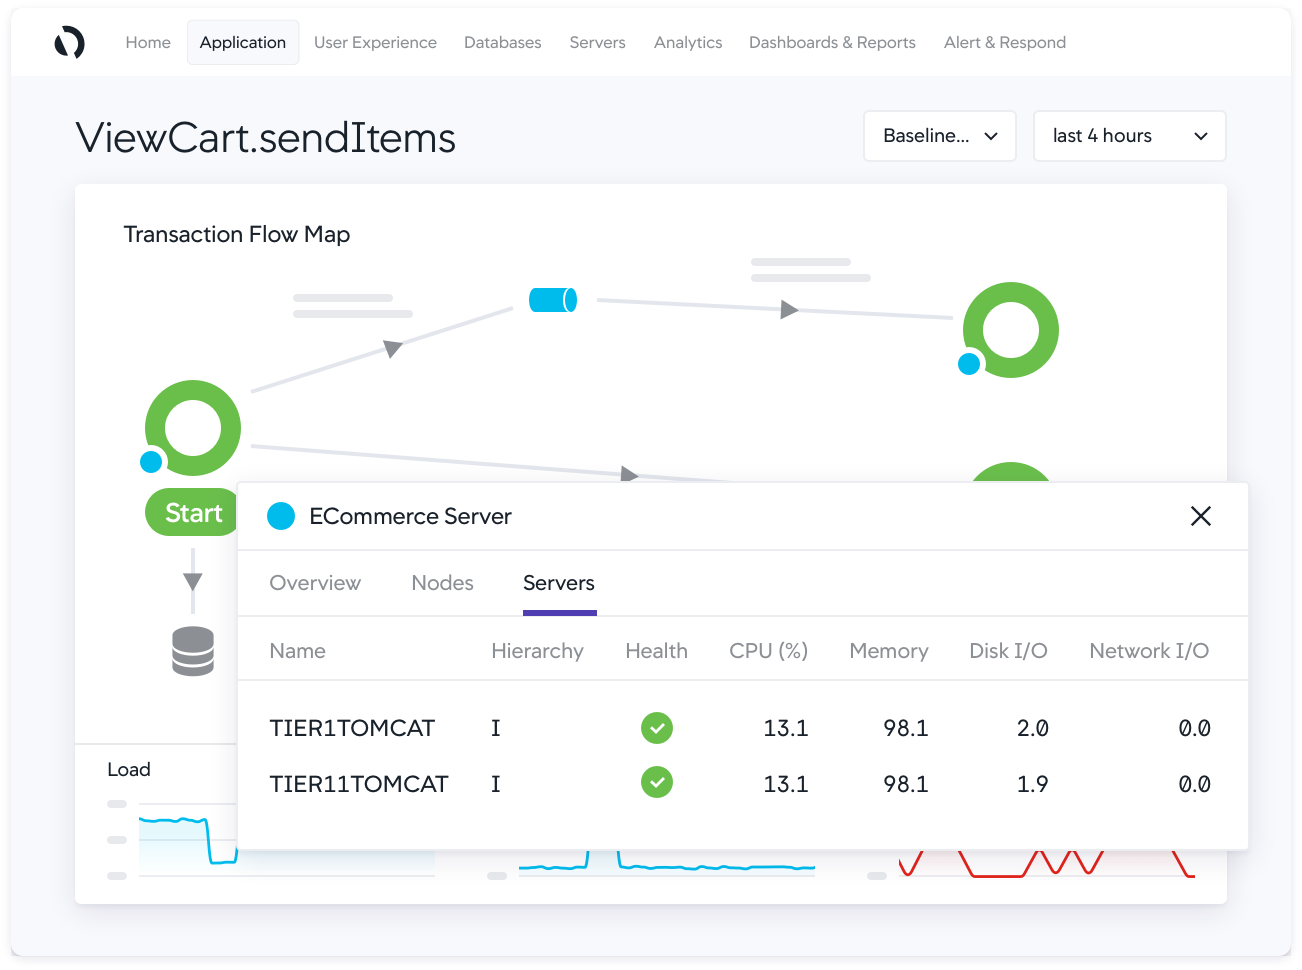 Server monitoring metrics in the context of your business transactions